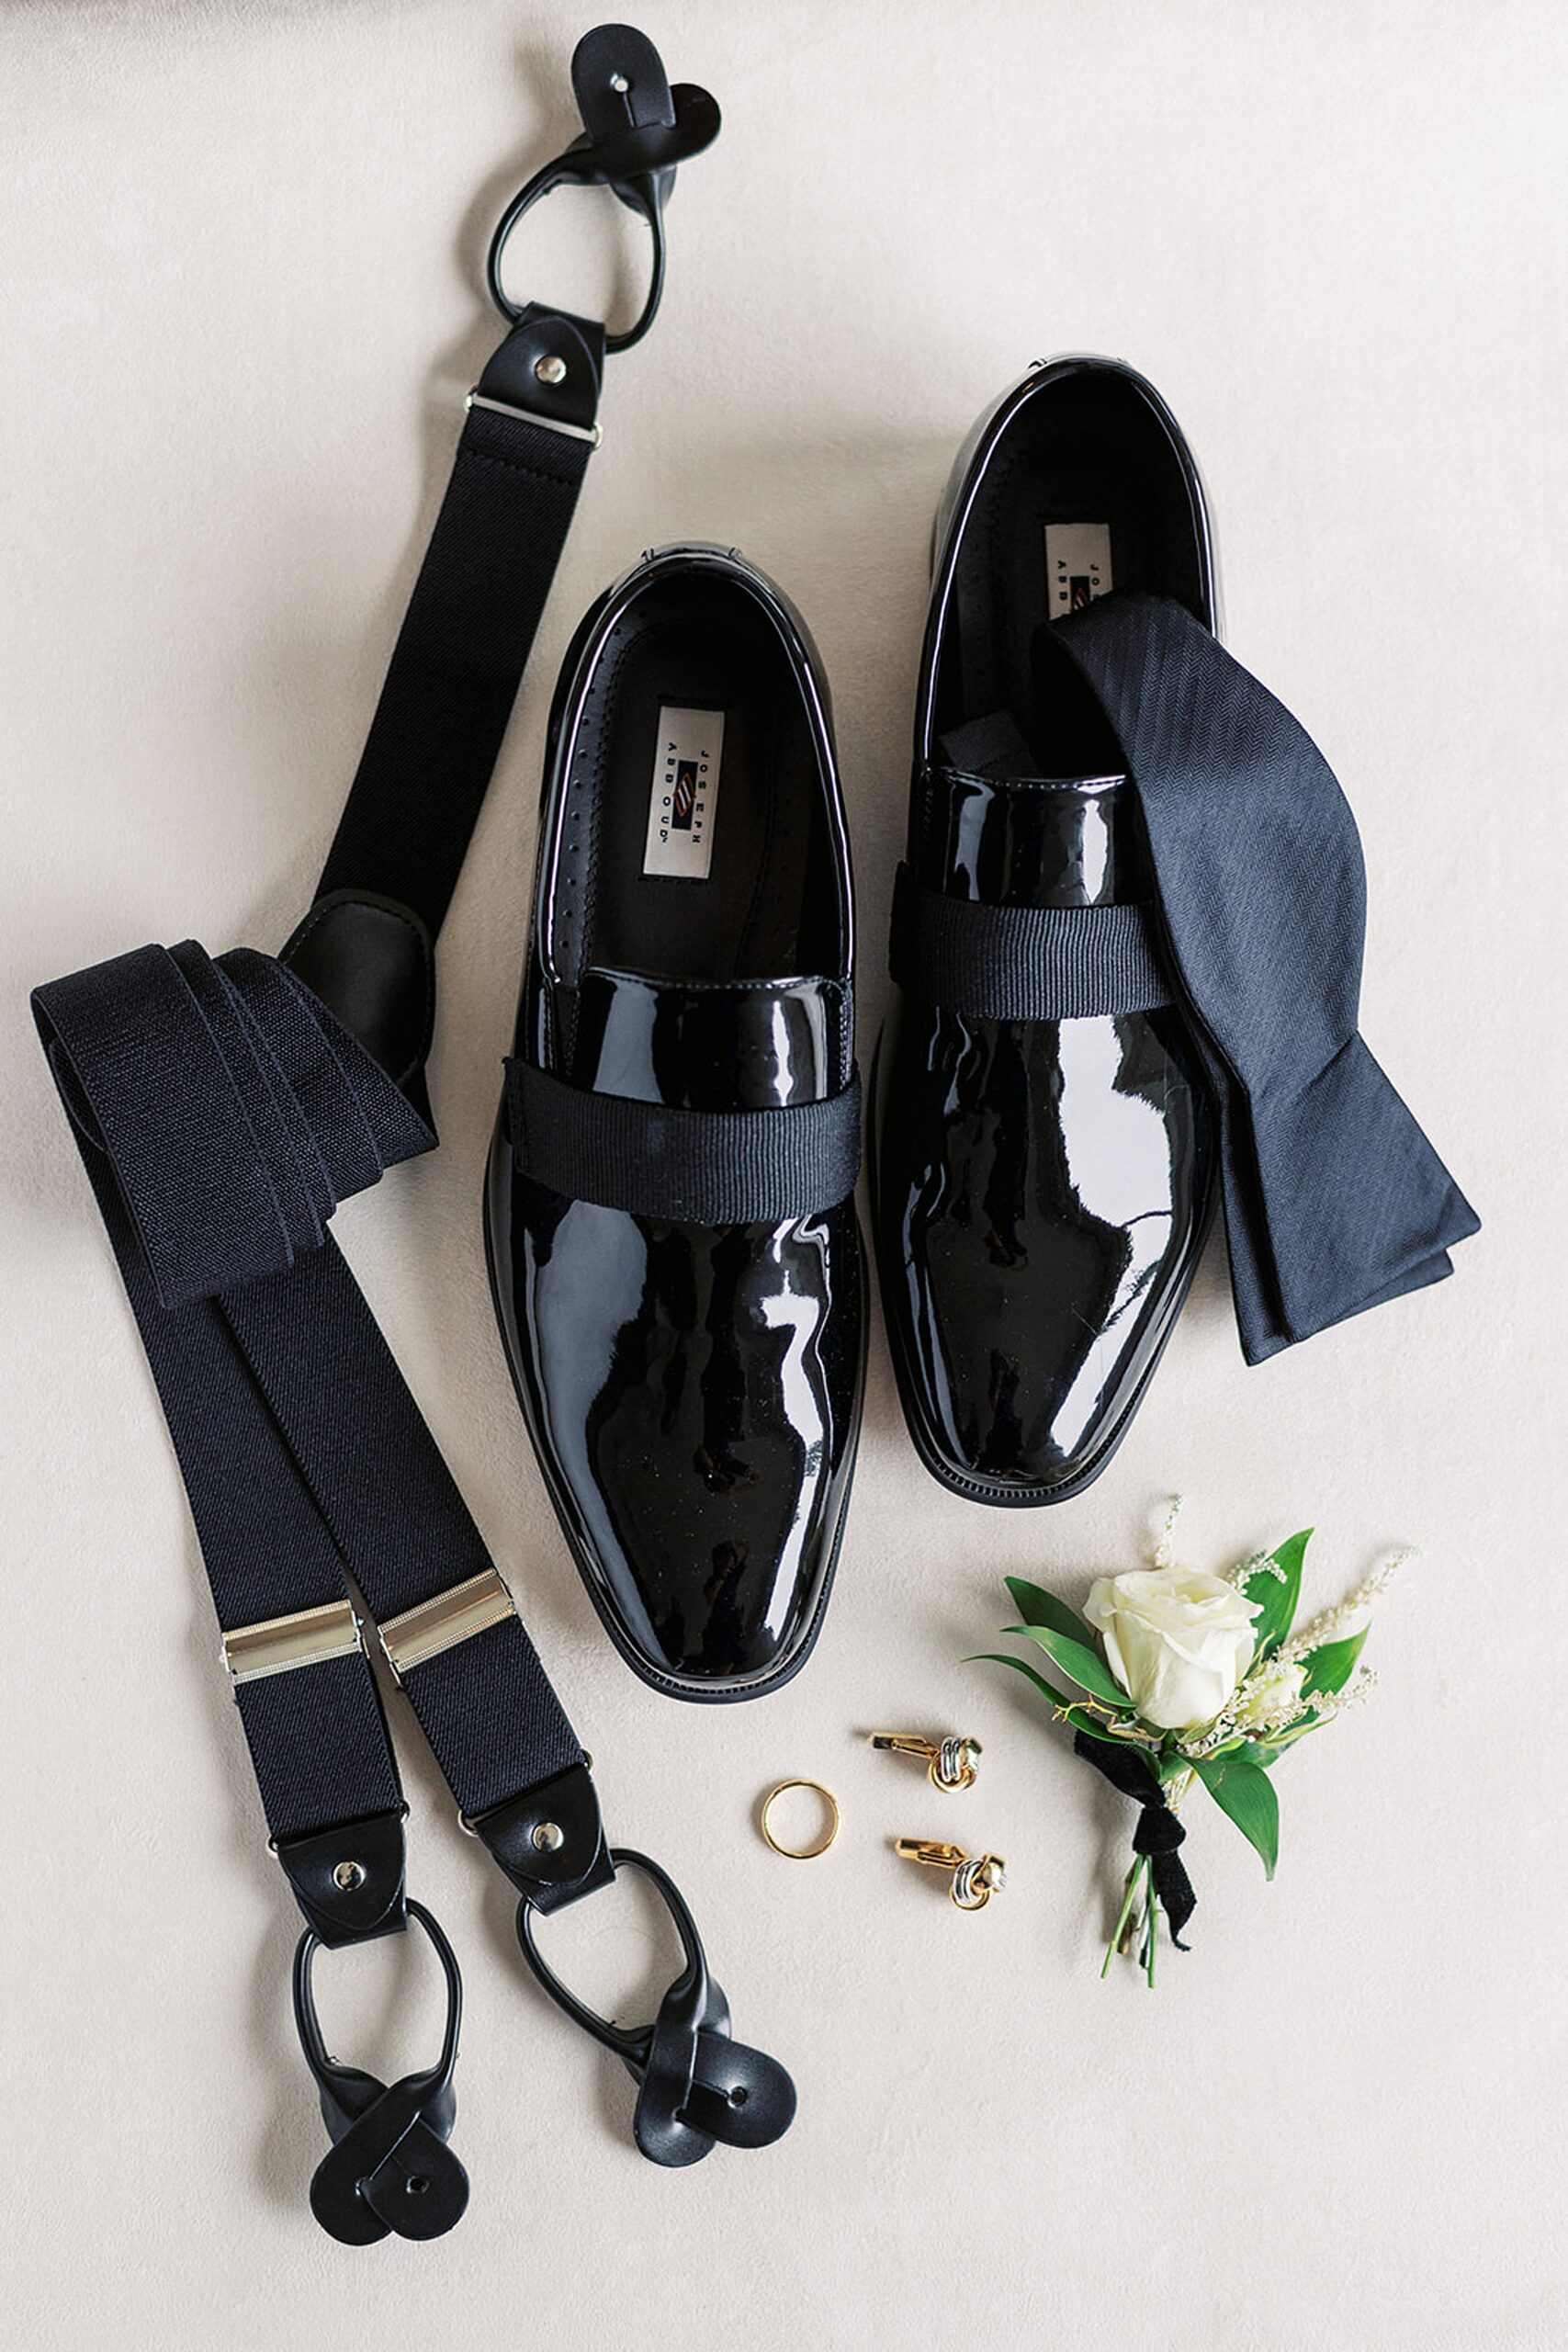 Details of a groom's shoes, ring, cufflinks, suspenders and boutanier